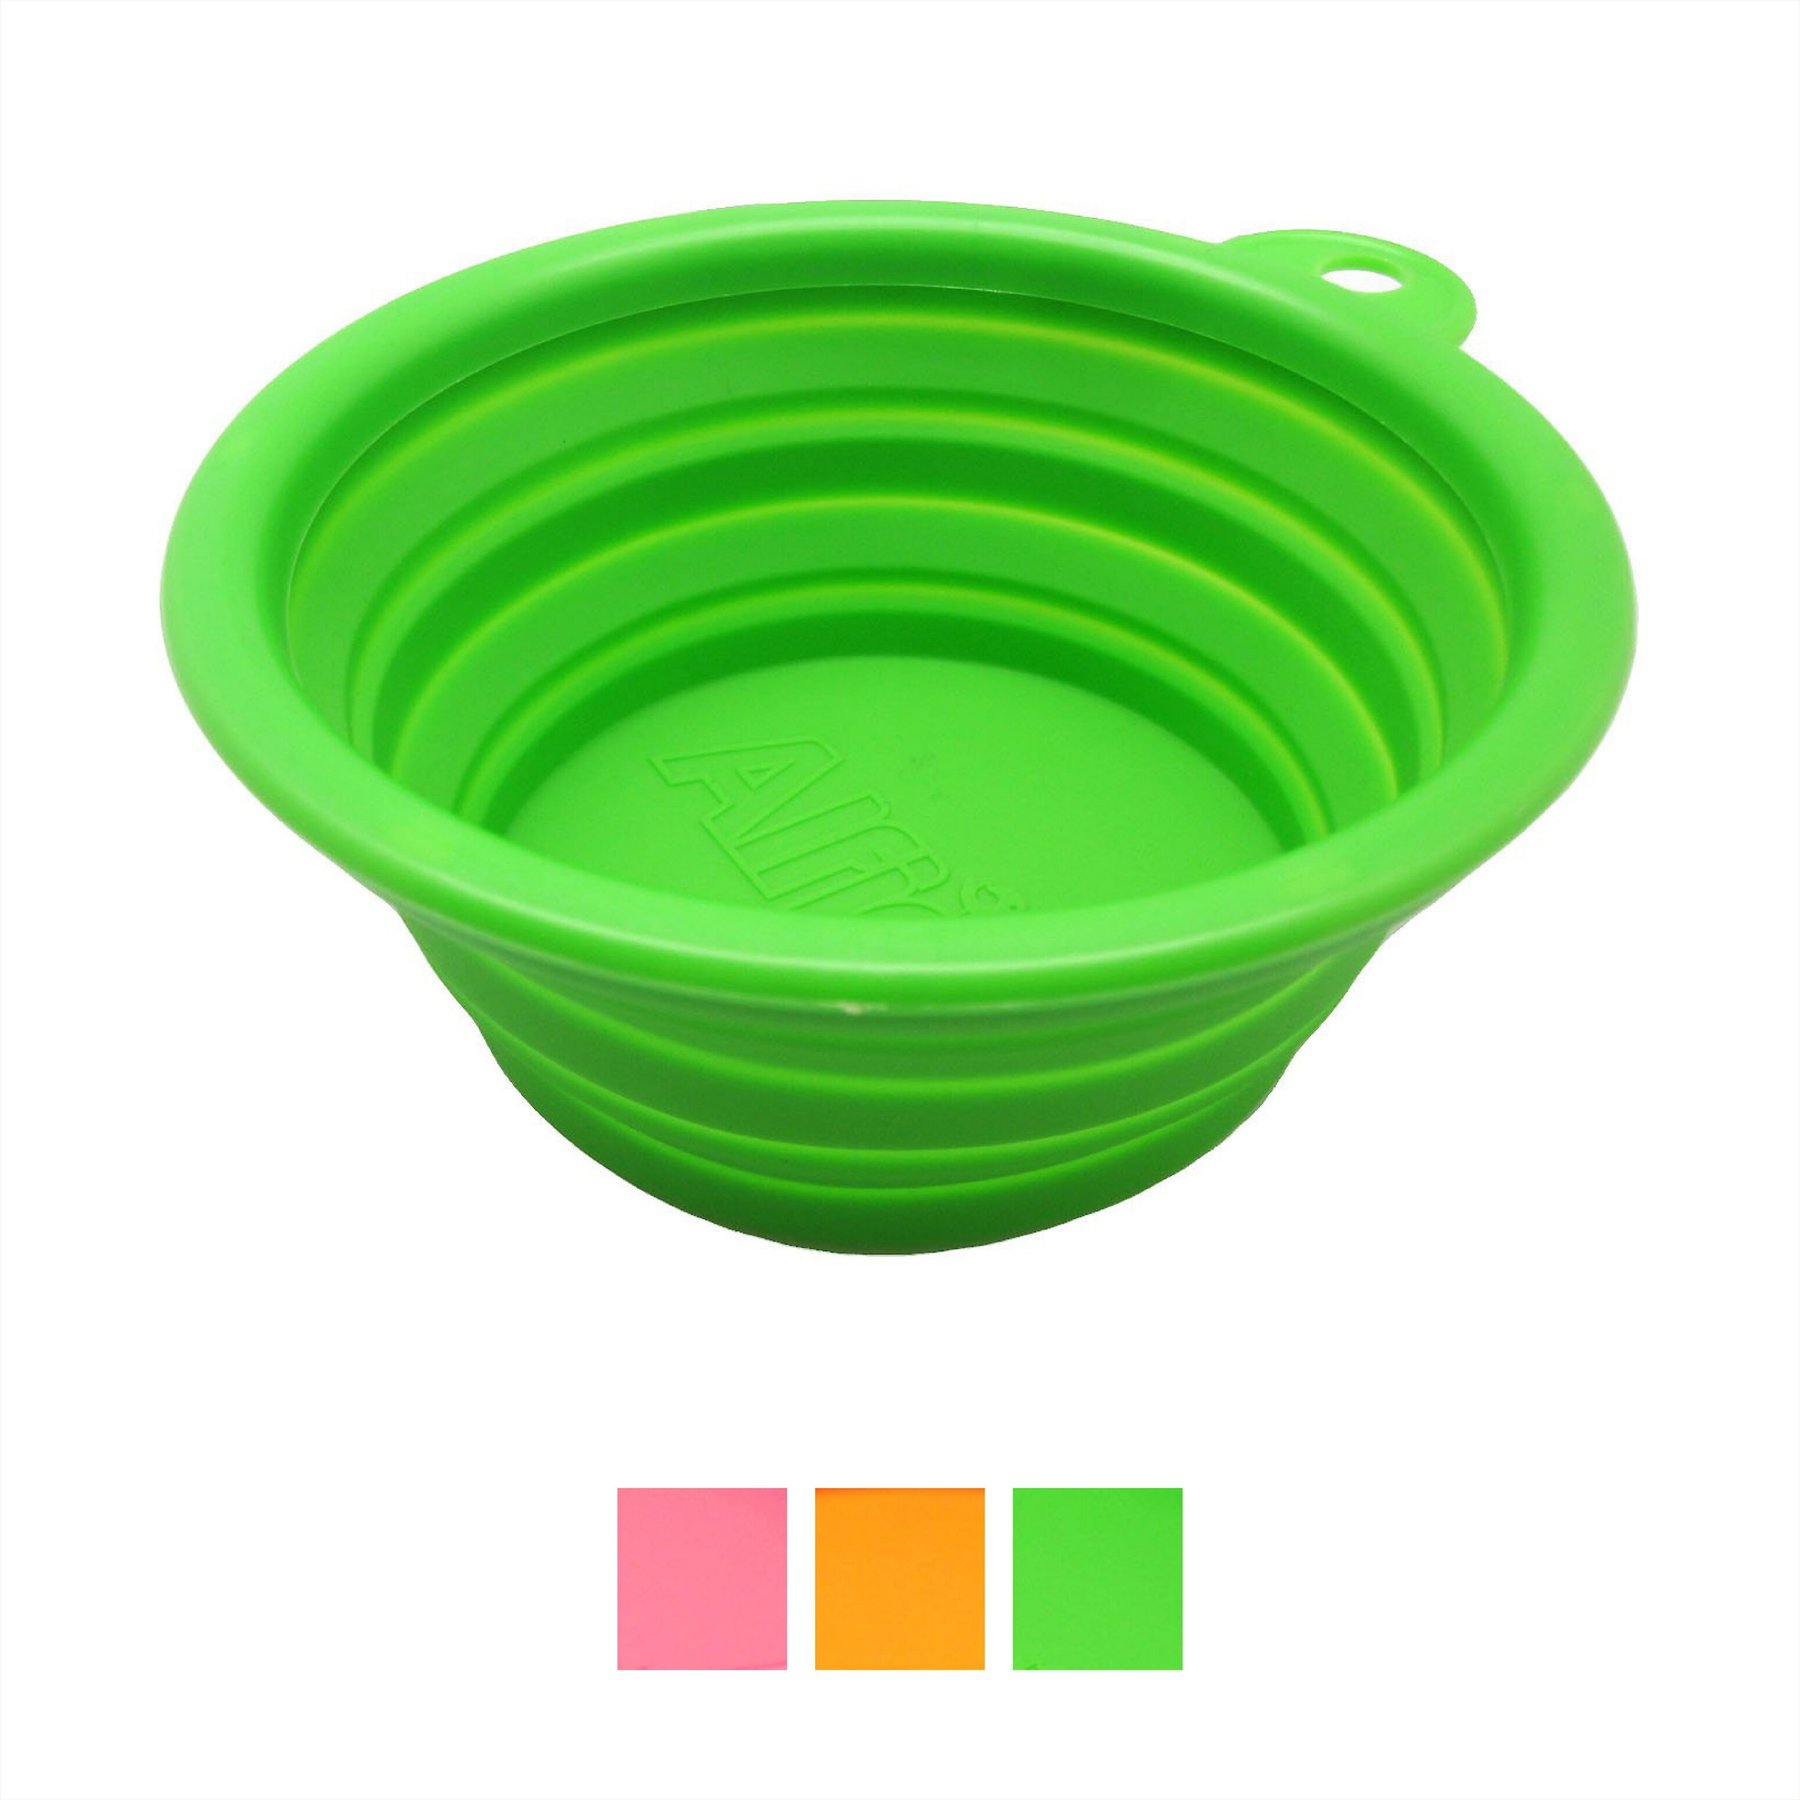 Silicone Expandable Collapsible Salad Bowl For Travel Camping Hiking - Buy  Collapsible Bowl,Silicone Salad Bowl,Bowl For Travel Product on